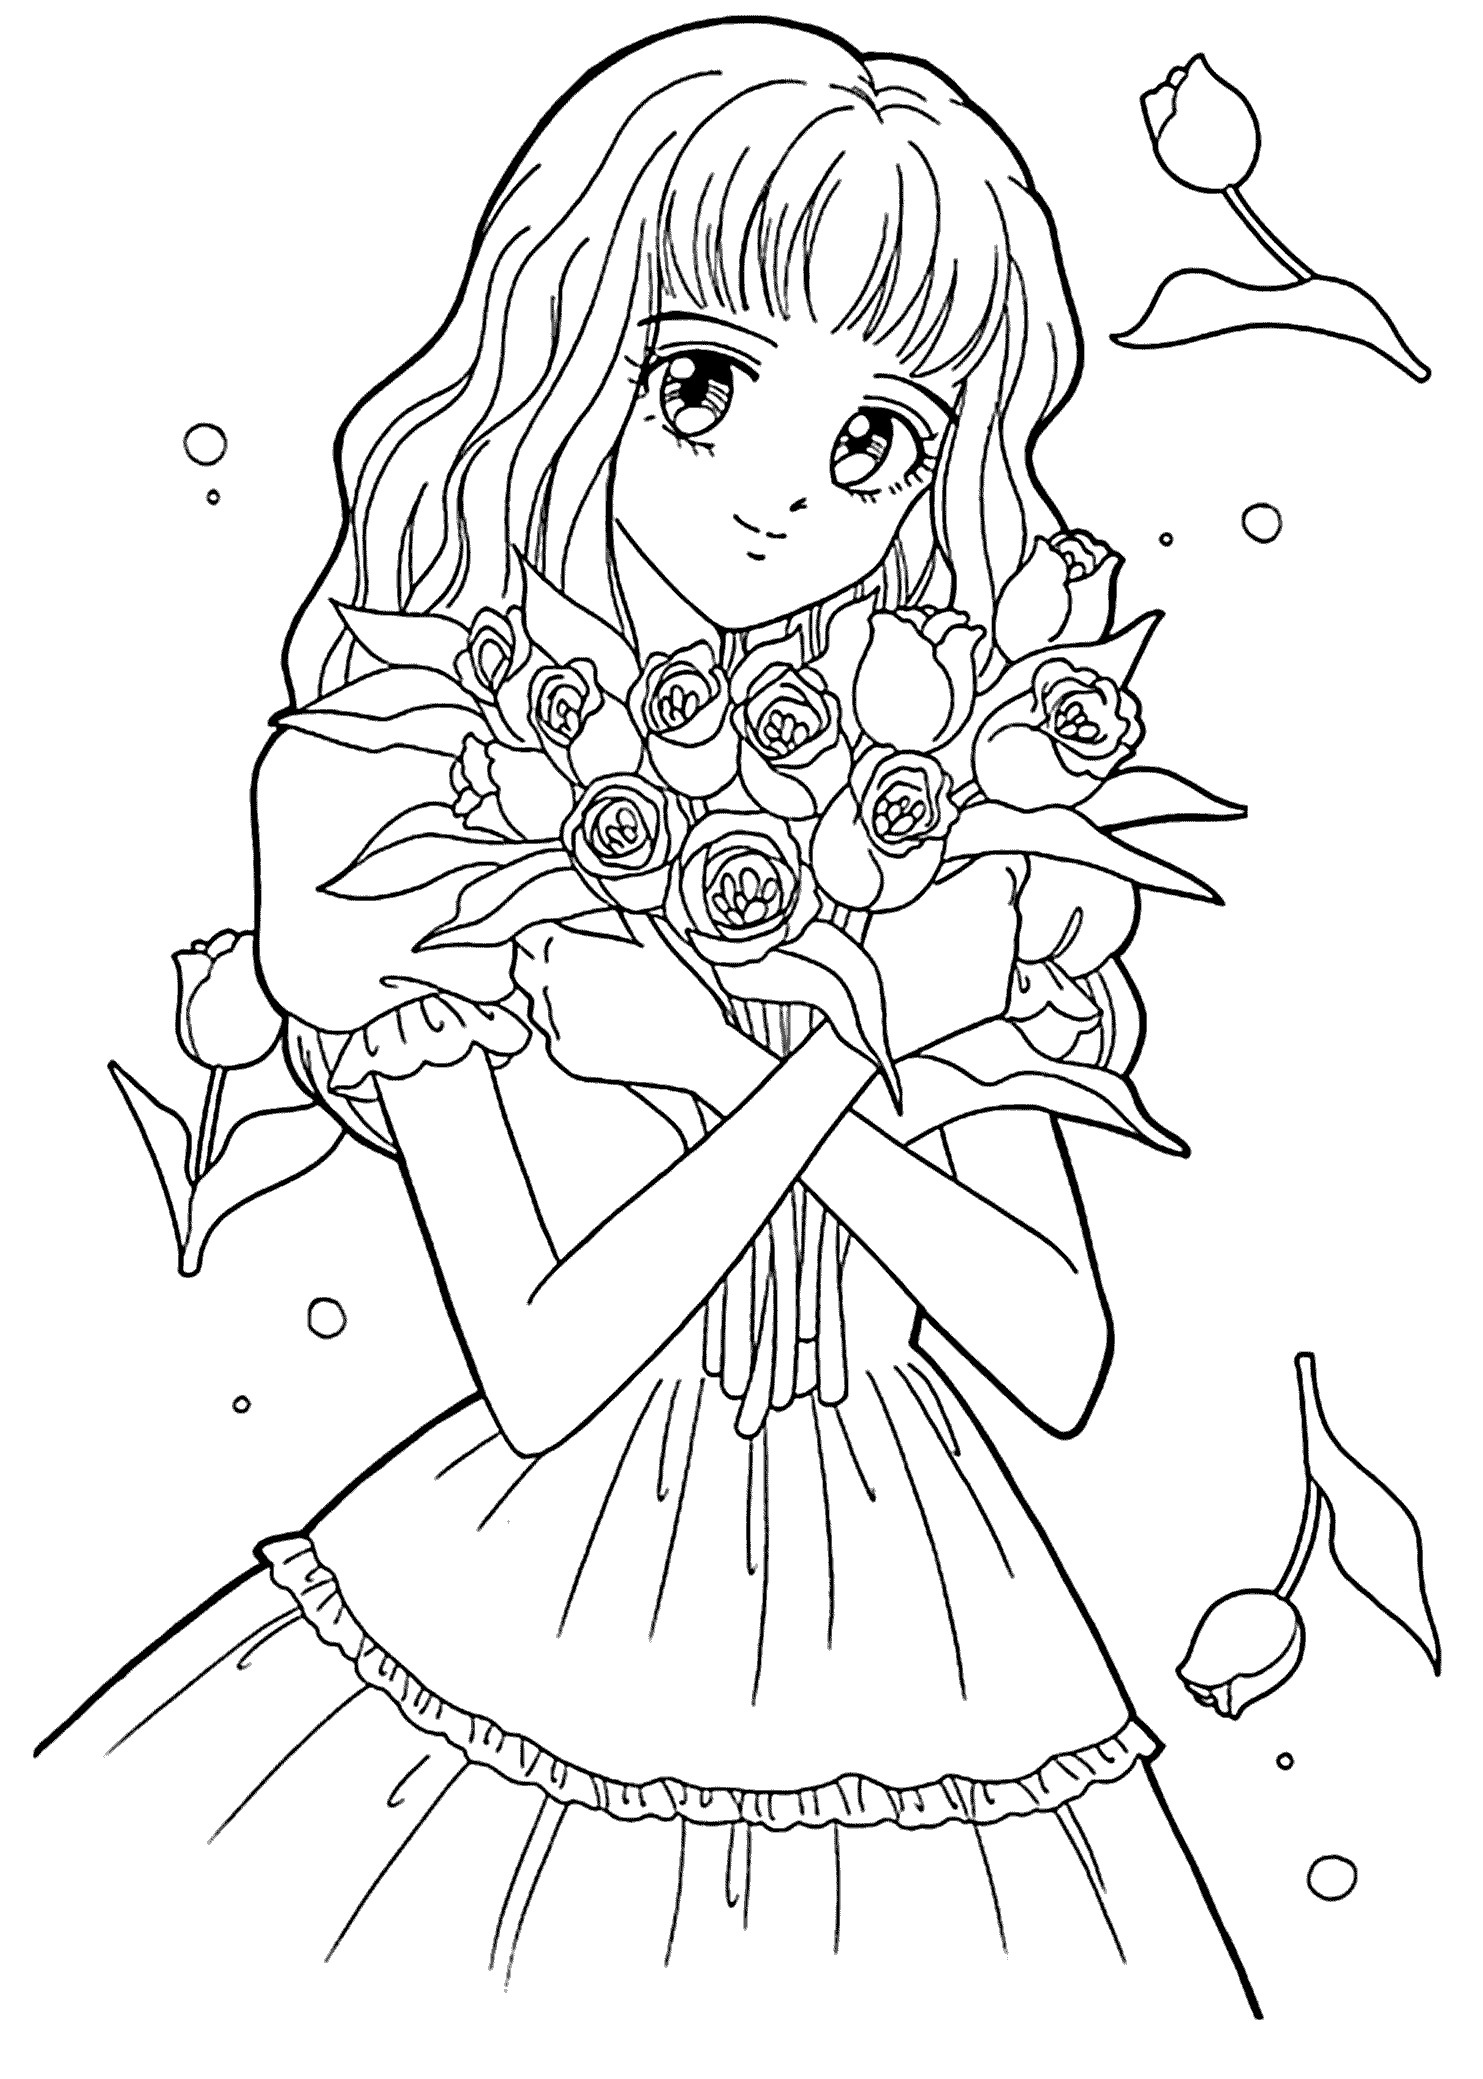 Free Girl Coloring Pages To Print
 Best Free Printable Coloring Pages for Kids and Teens